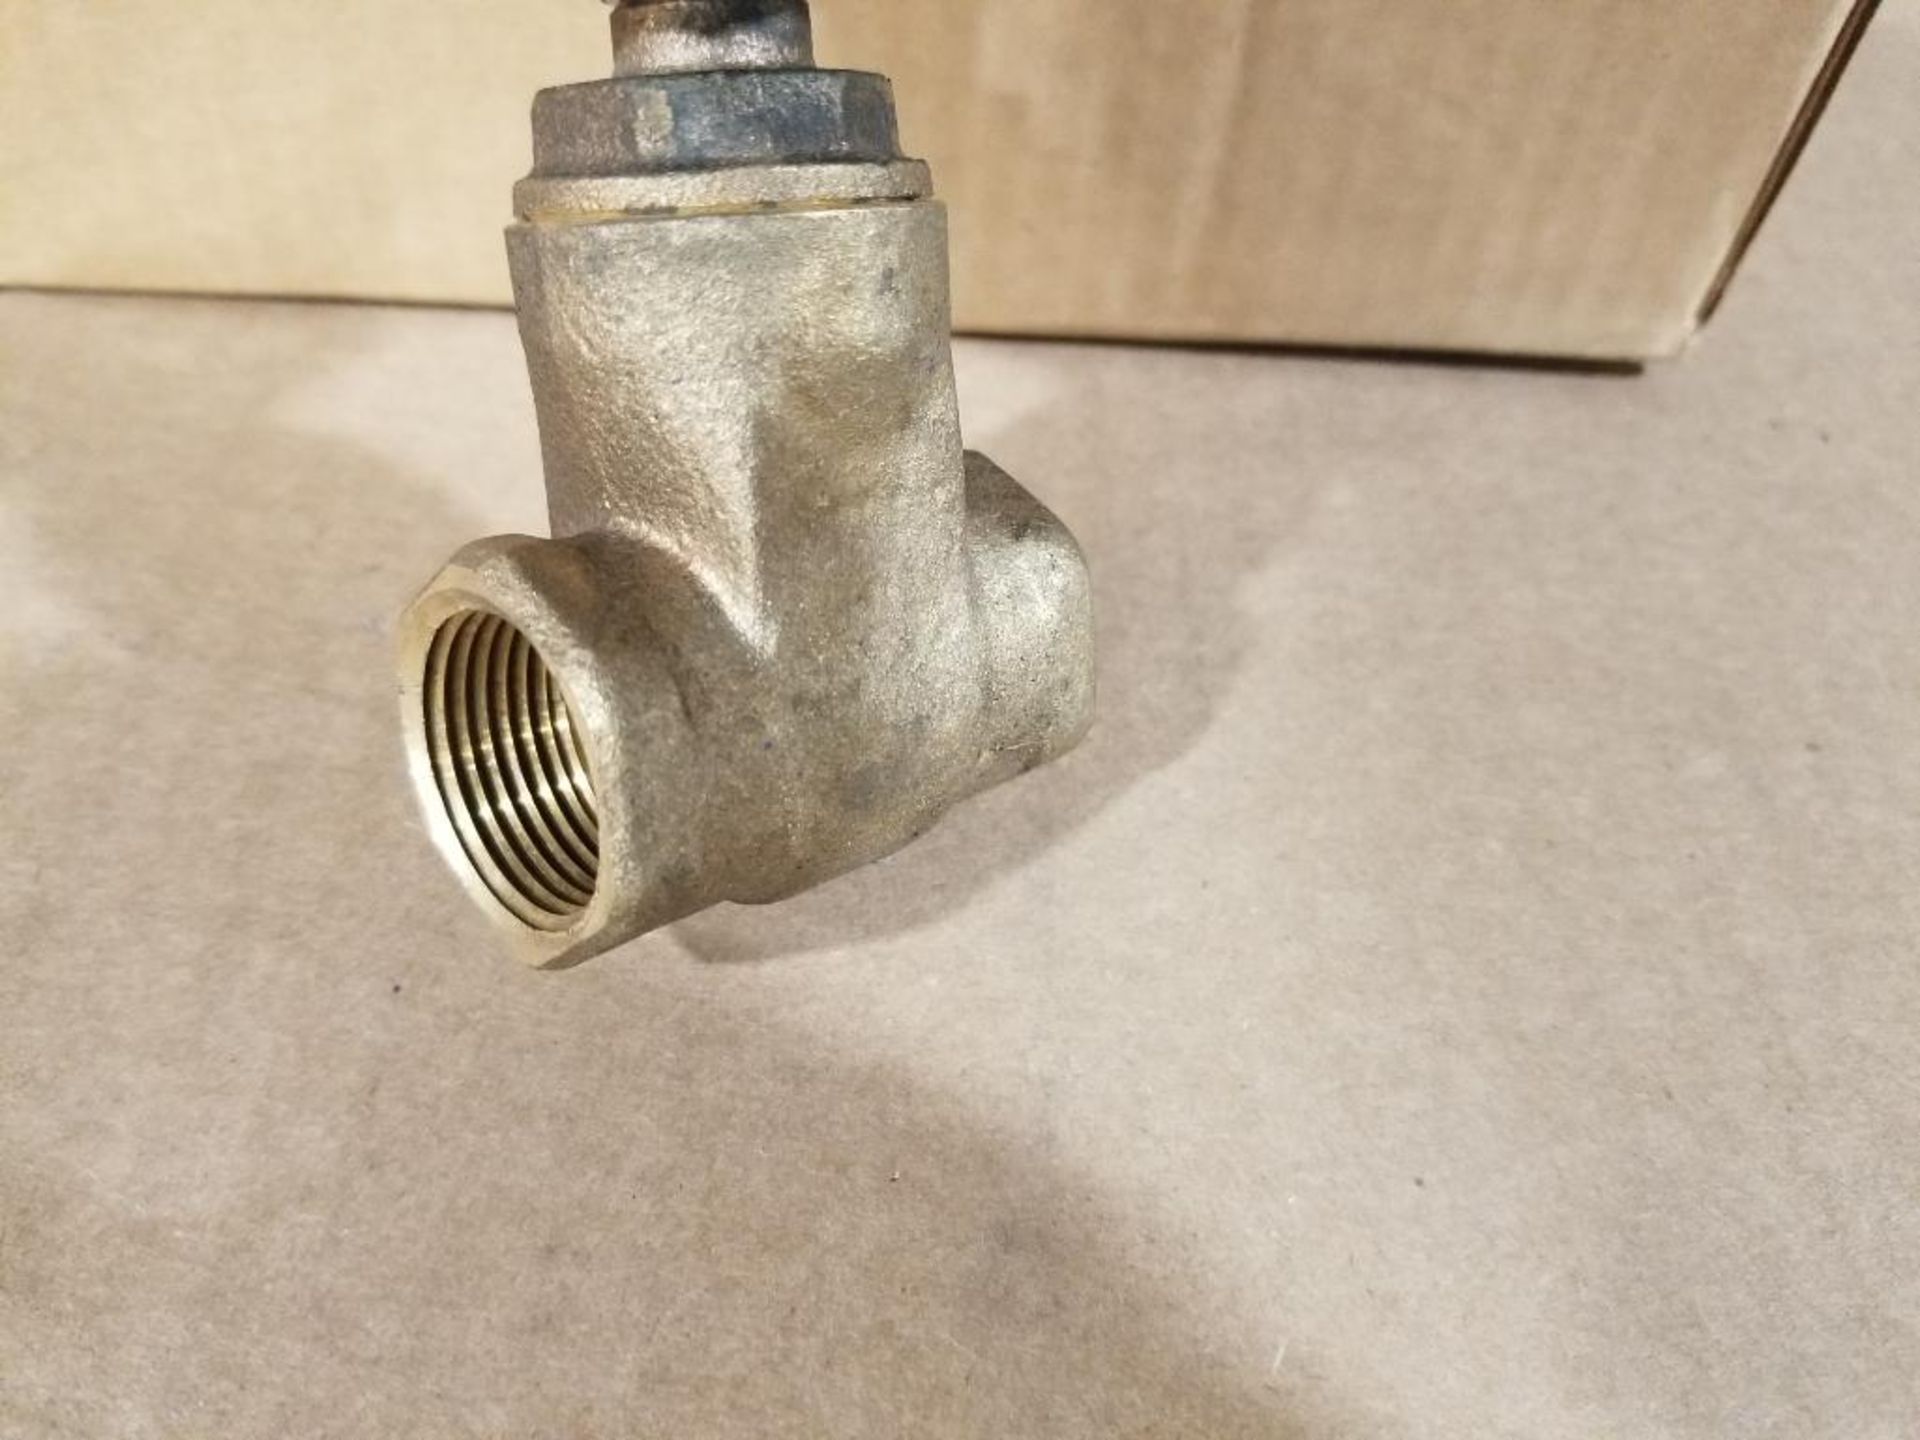 Qty 75 - Nibco 3/4in brass threaded shut off valve. New in bulk box. - Image 6 of 9